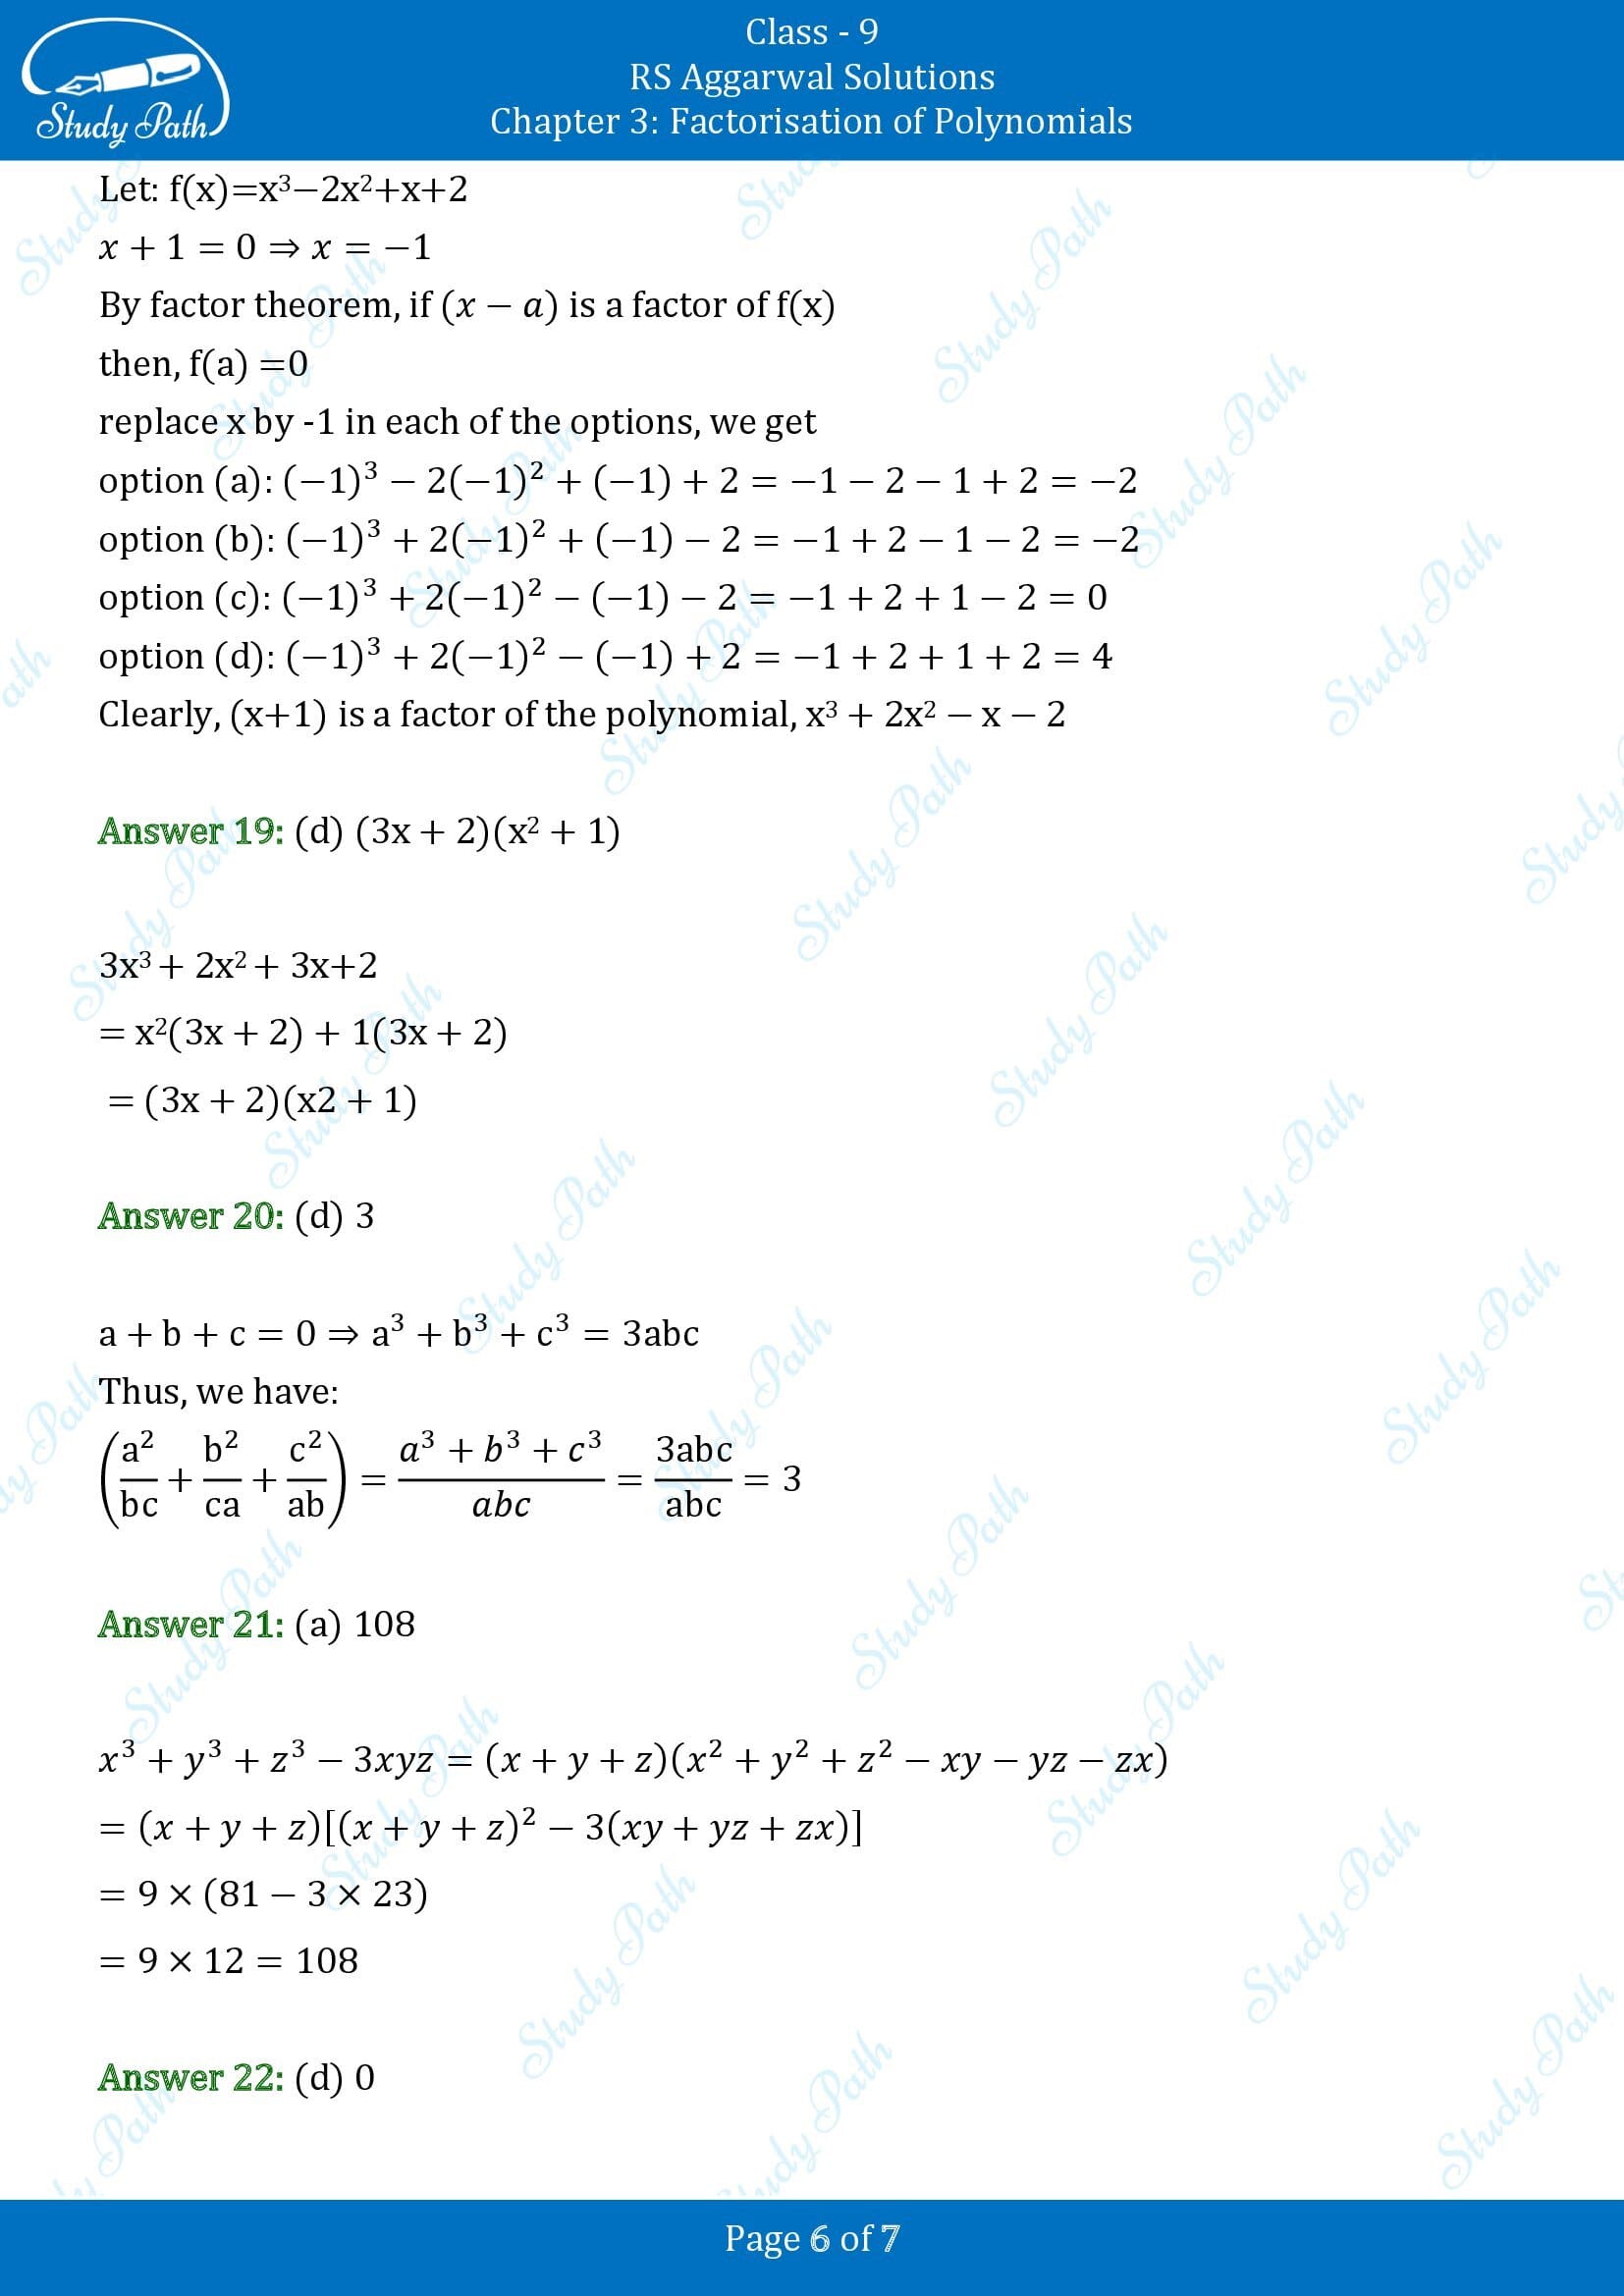 RS Aggarwal Solutions Class 9 Chapter 3 Factorisation of Polynomials Multiple Choice Questions MCQs 00006